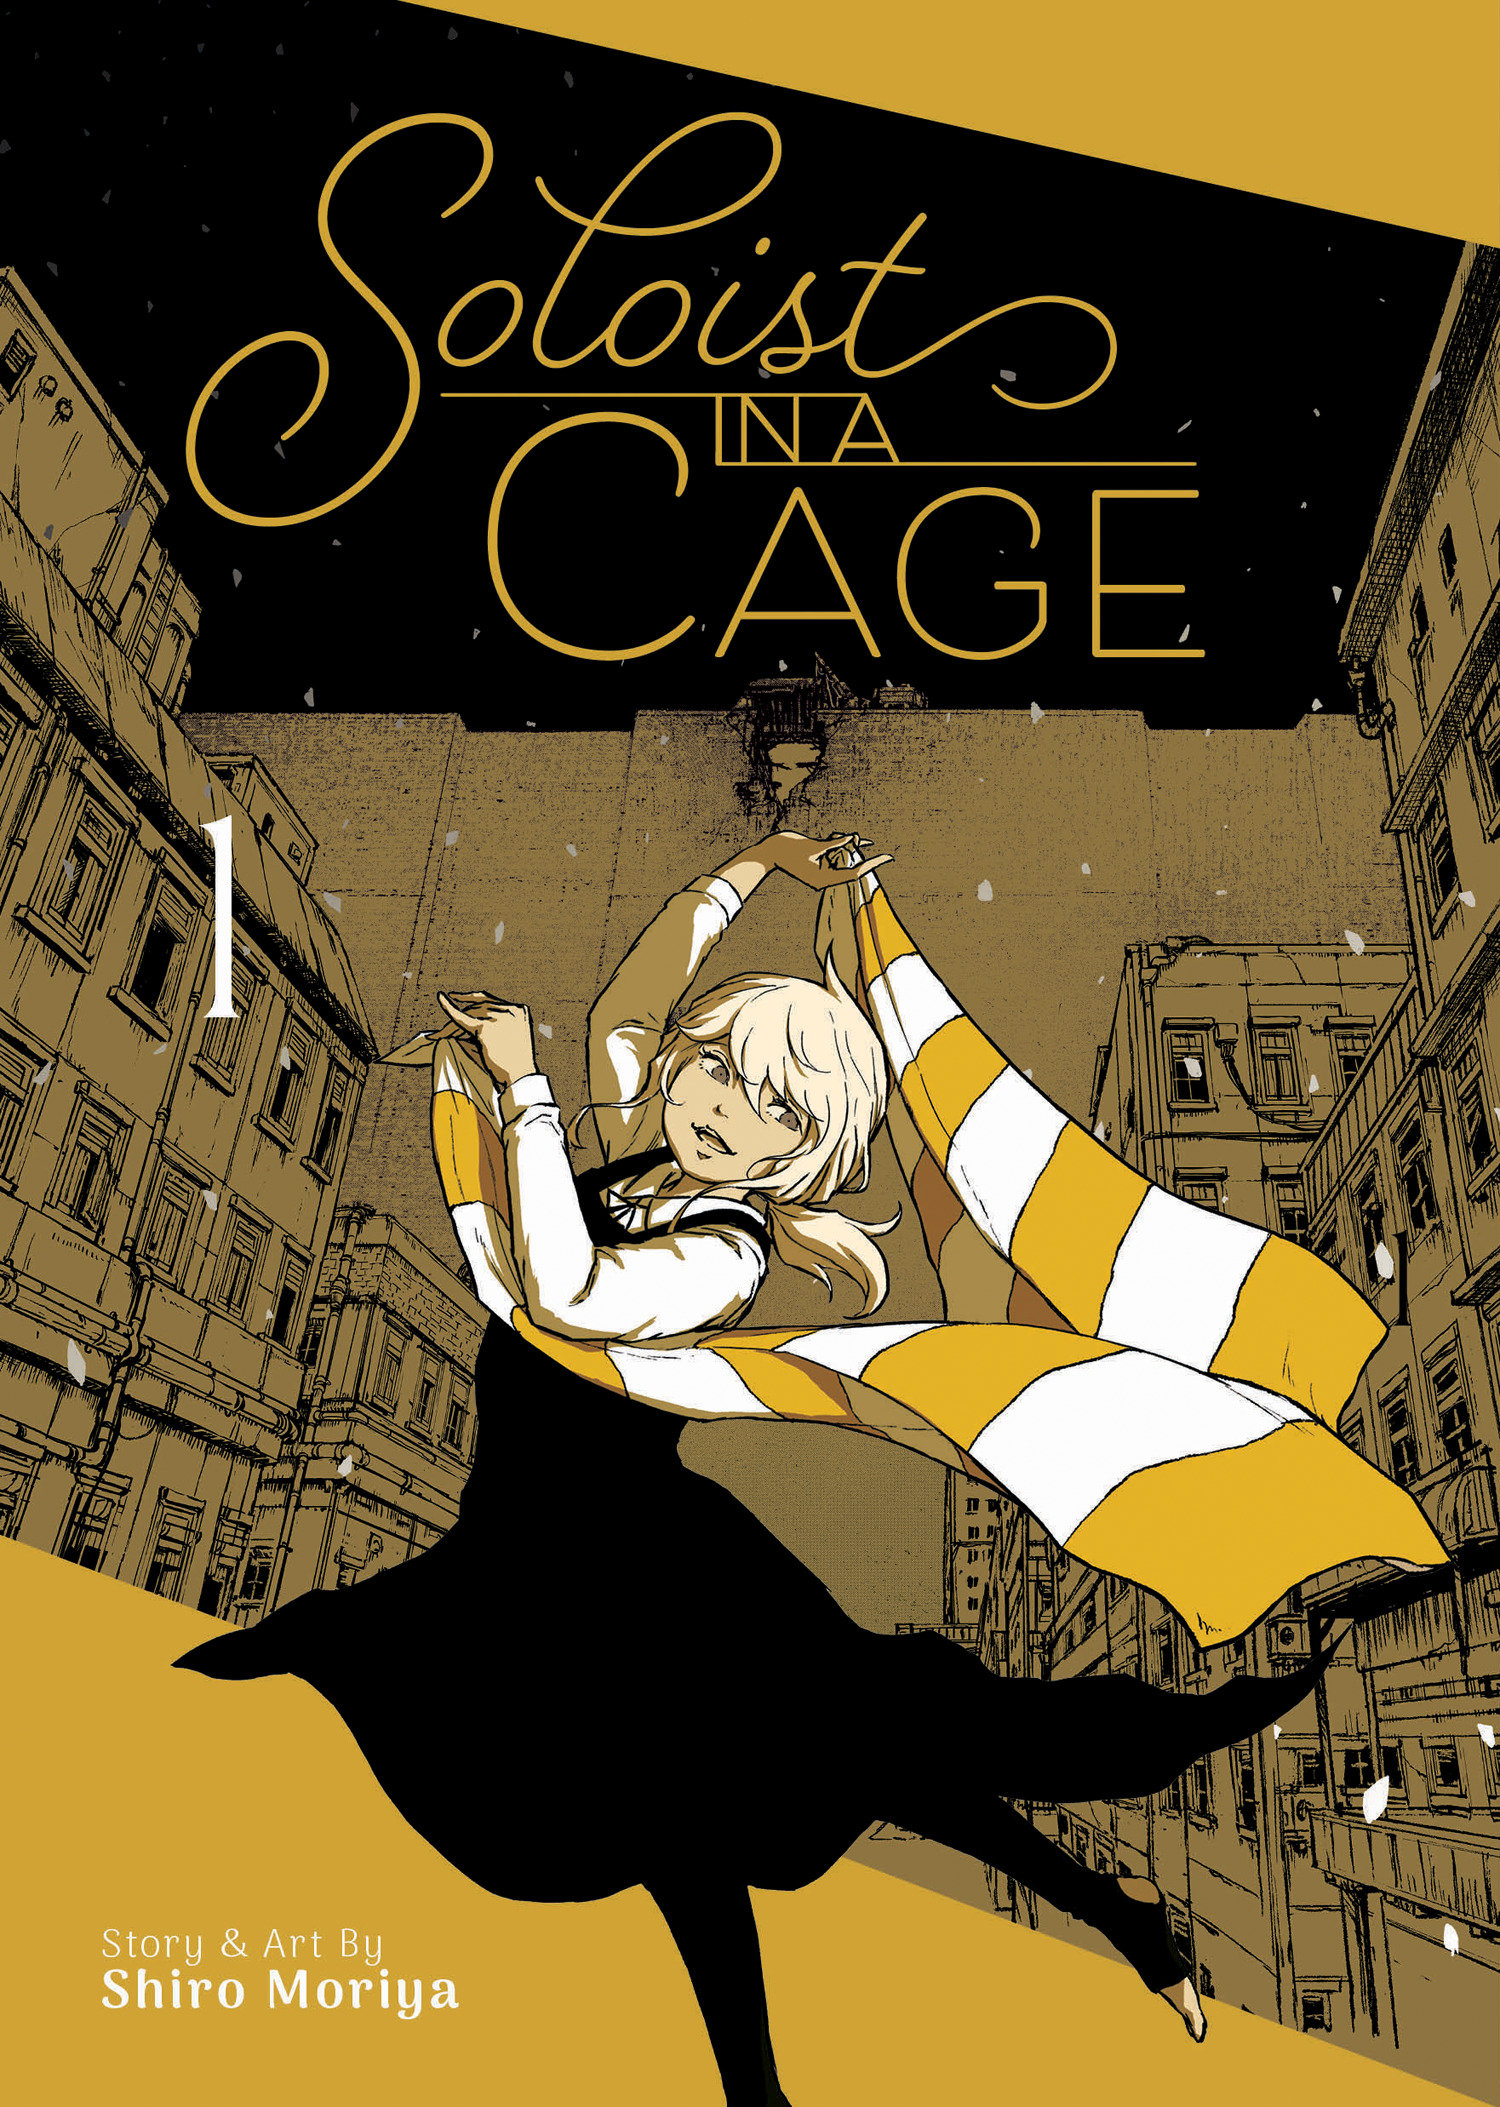 Soloist in a Cage Manga Volume 1